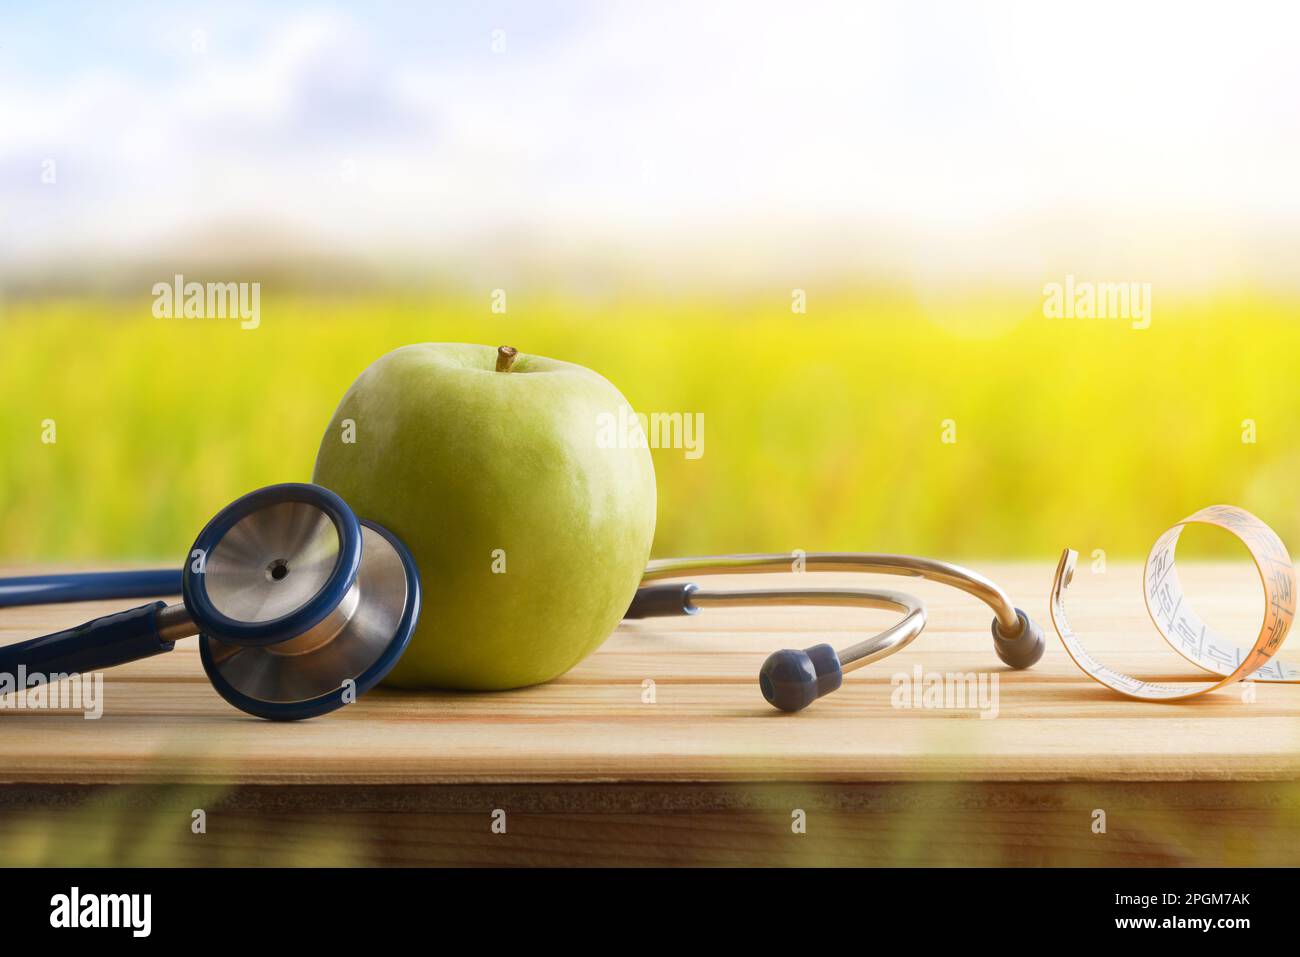 Health and check up concept with apple and stethoscope and tape measure around on wooden table with nature background. Front view. Stock Photo